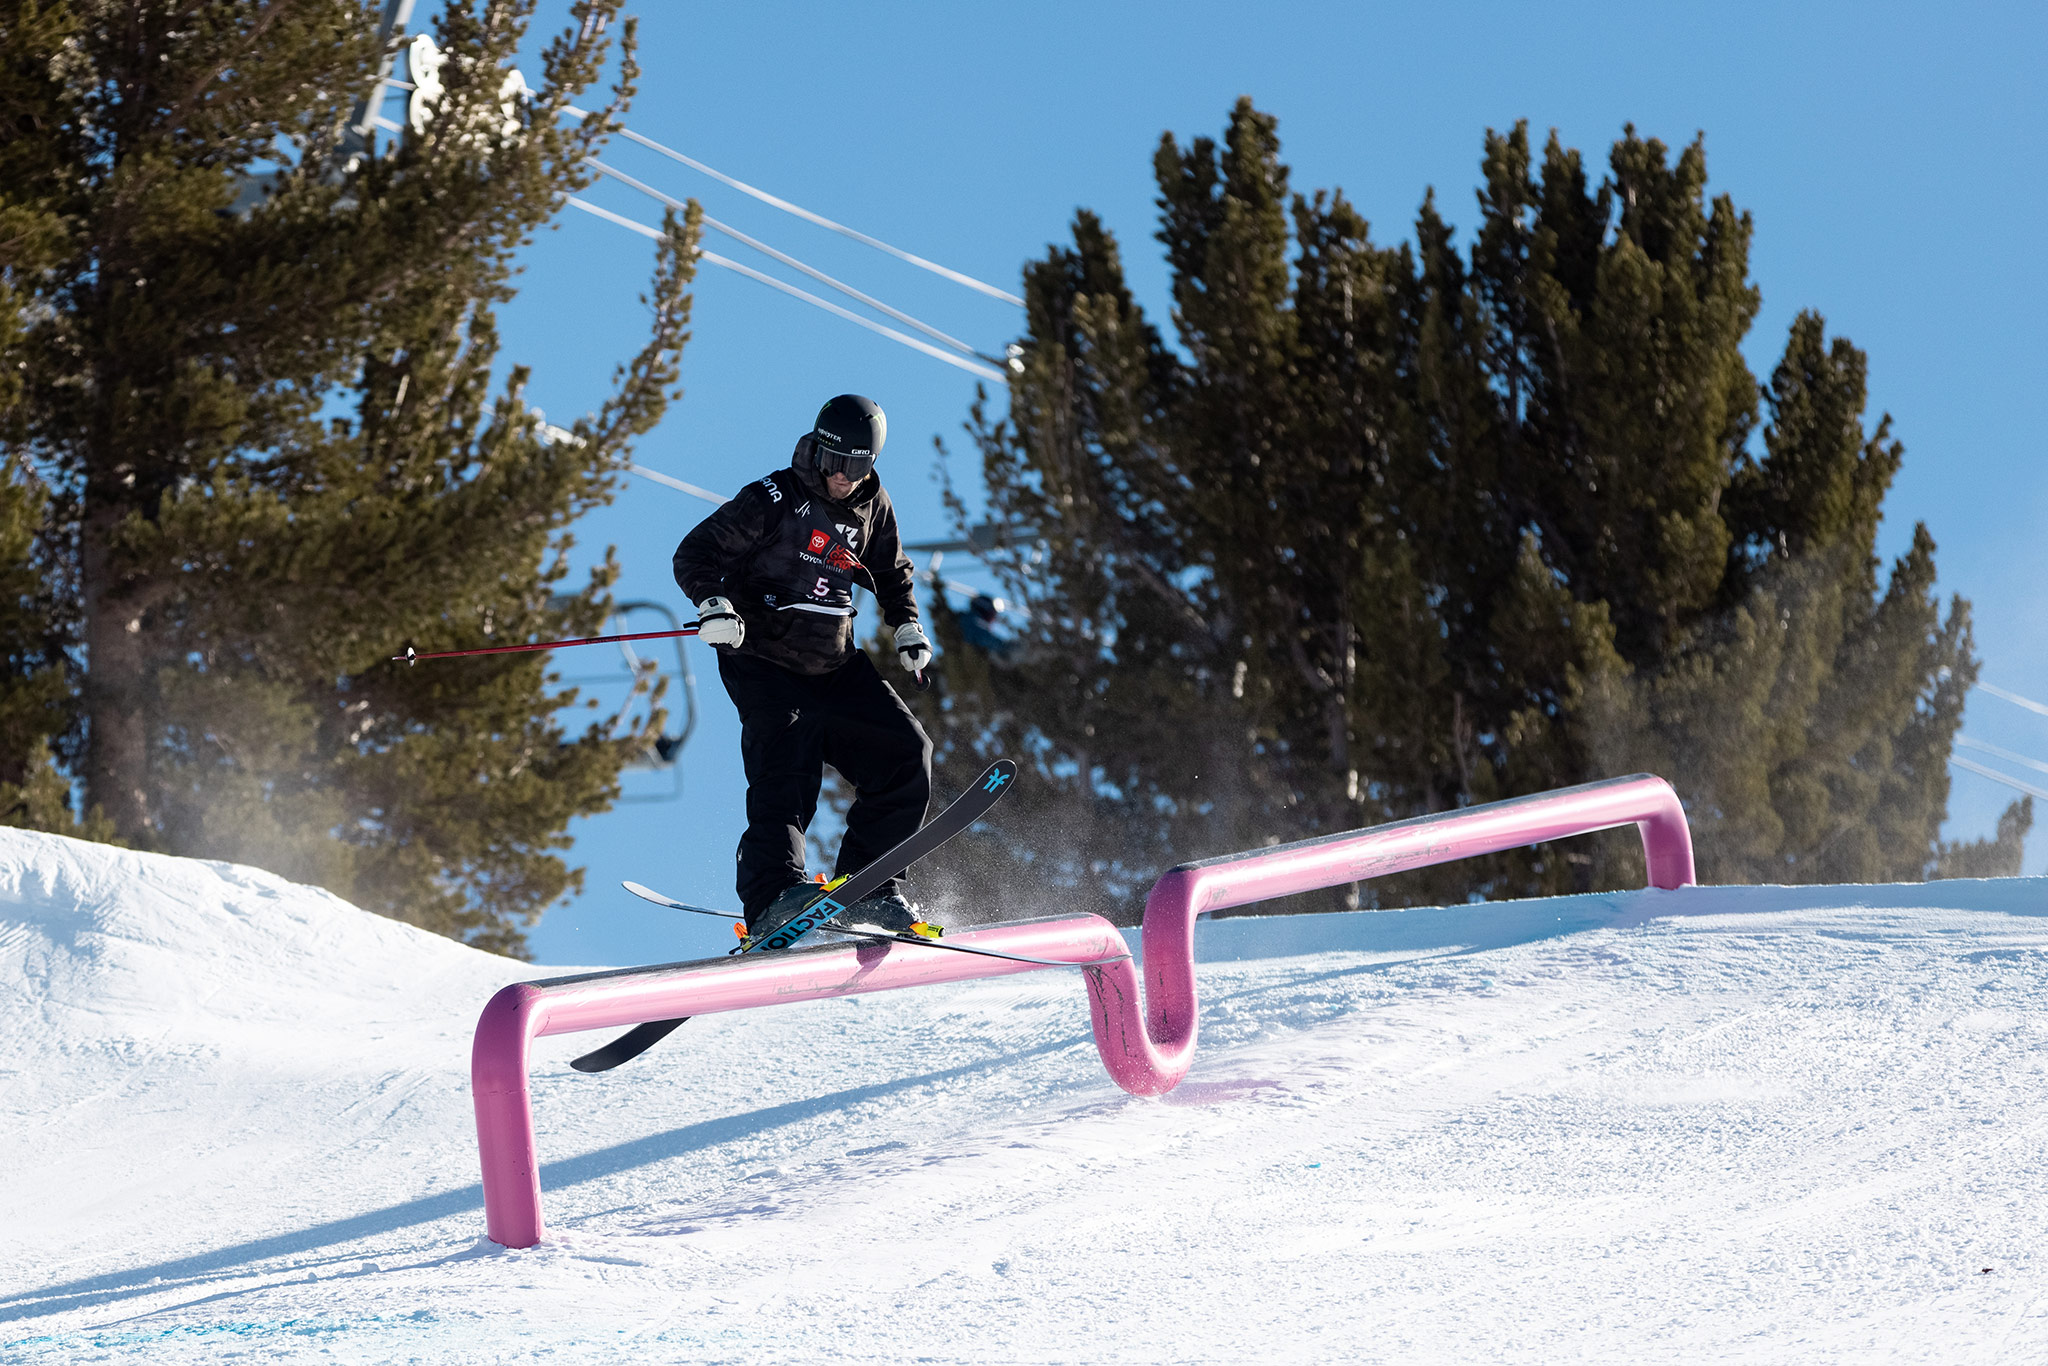 Alex Hall at the 2022 US Grand Prix Slopestyle in Mammoth Mountain, California